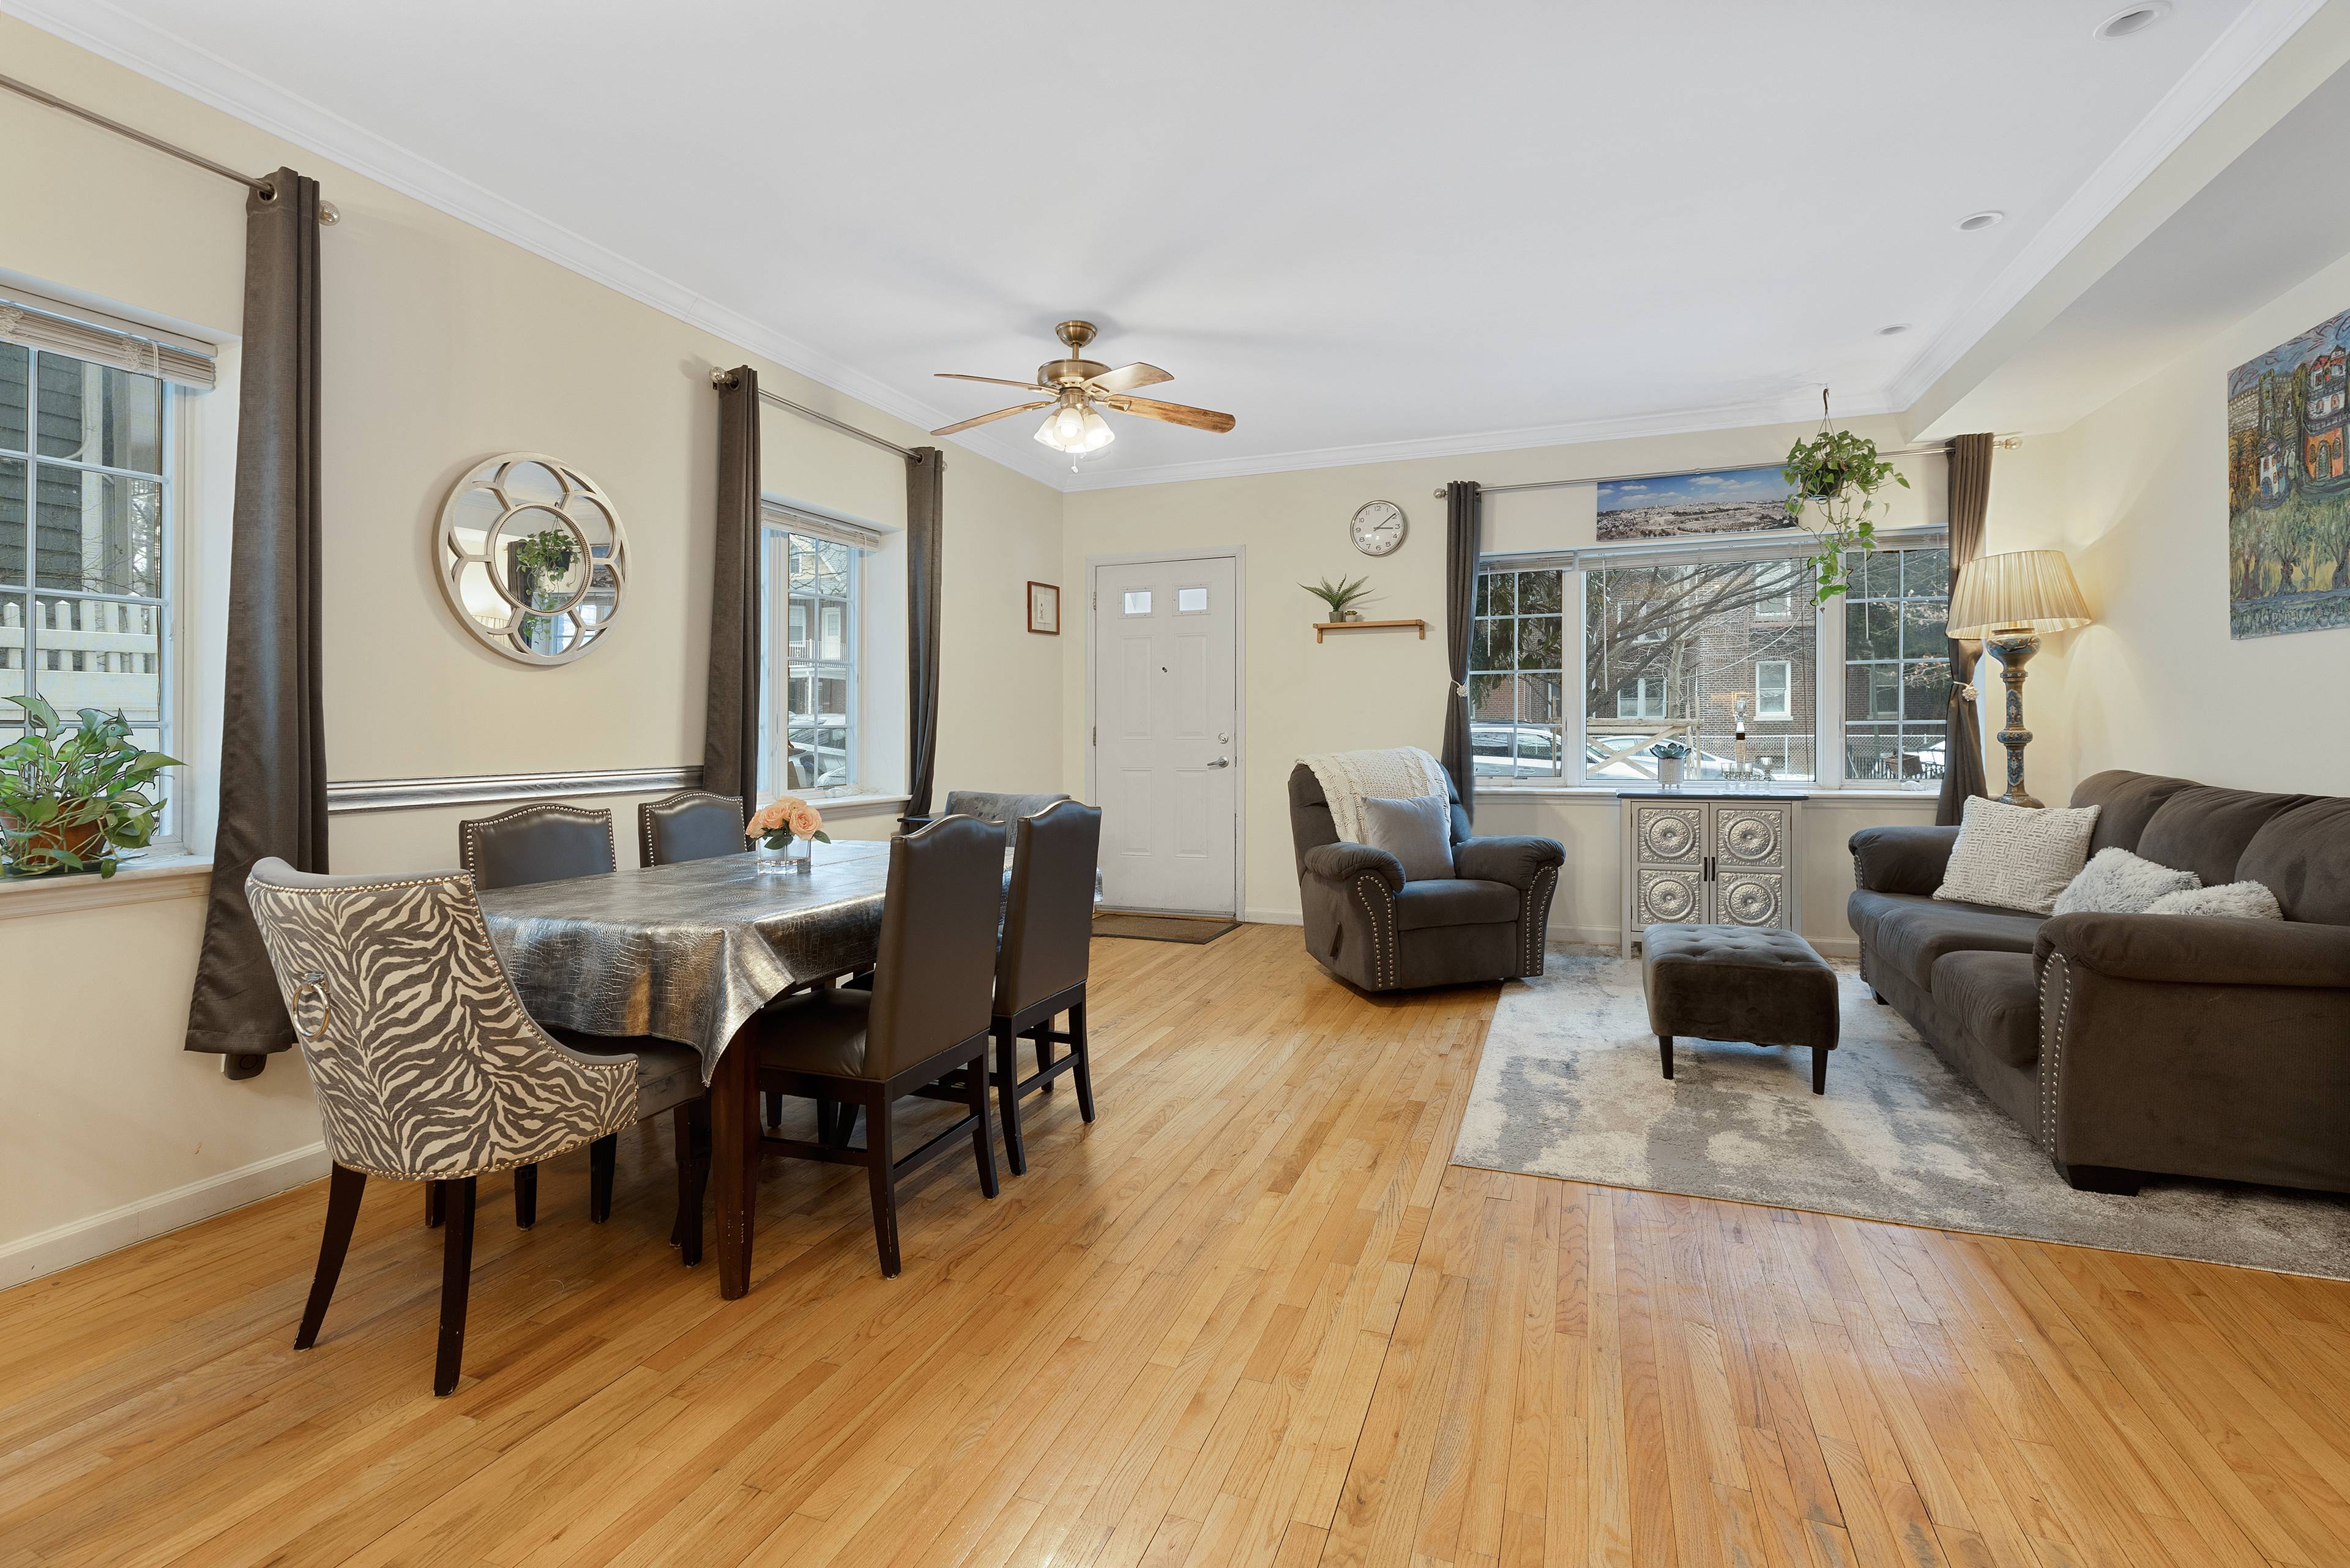 Room to roam ! Located in the Kensington Townhouses, on a quiet tree lined street, this bright and beautifully renovated 2 bedroom, 2.